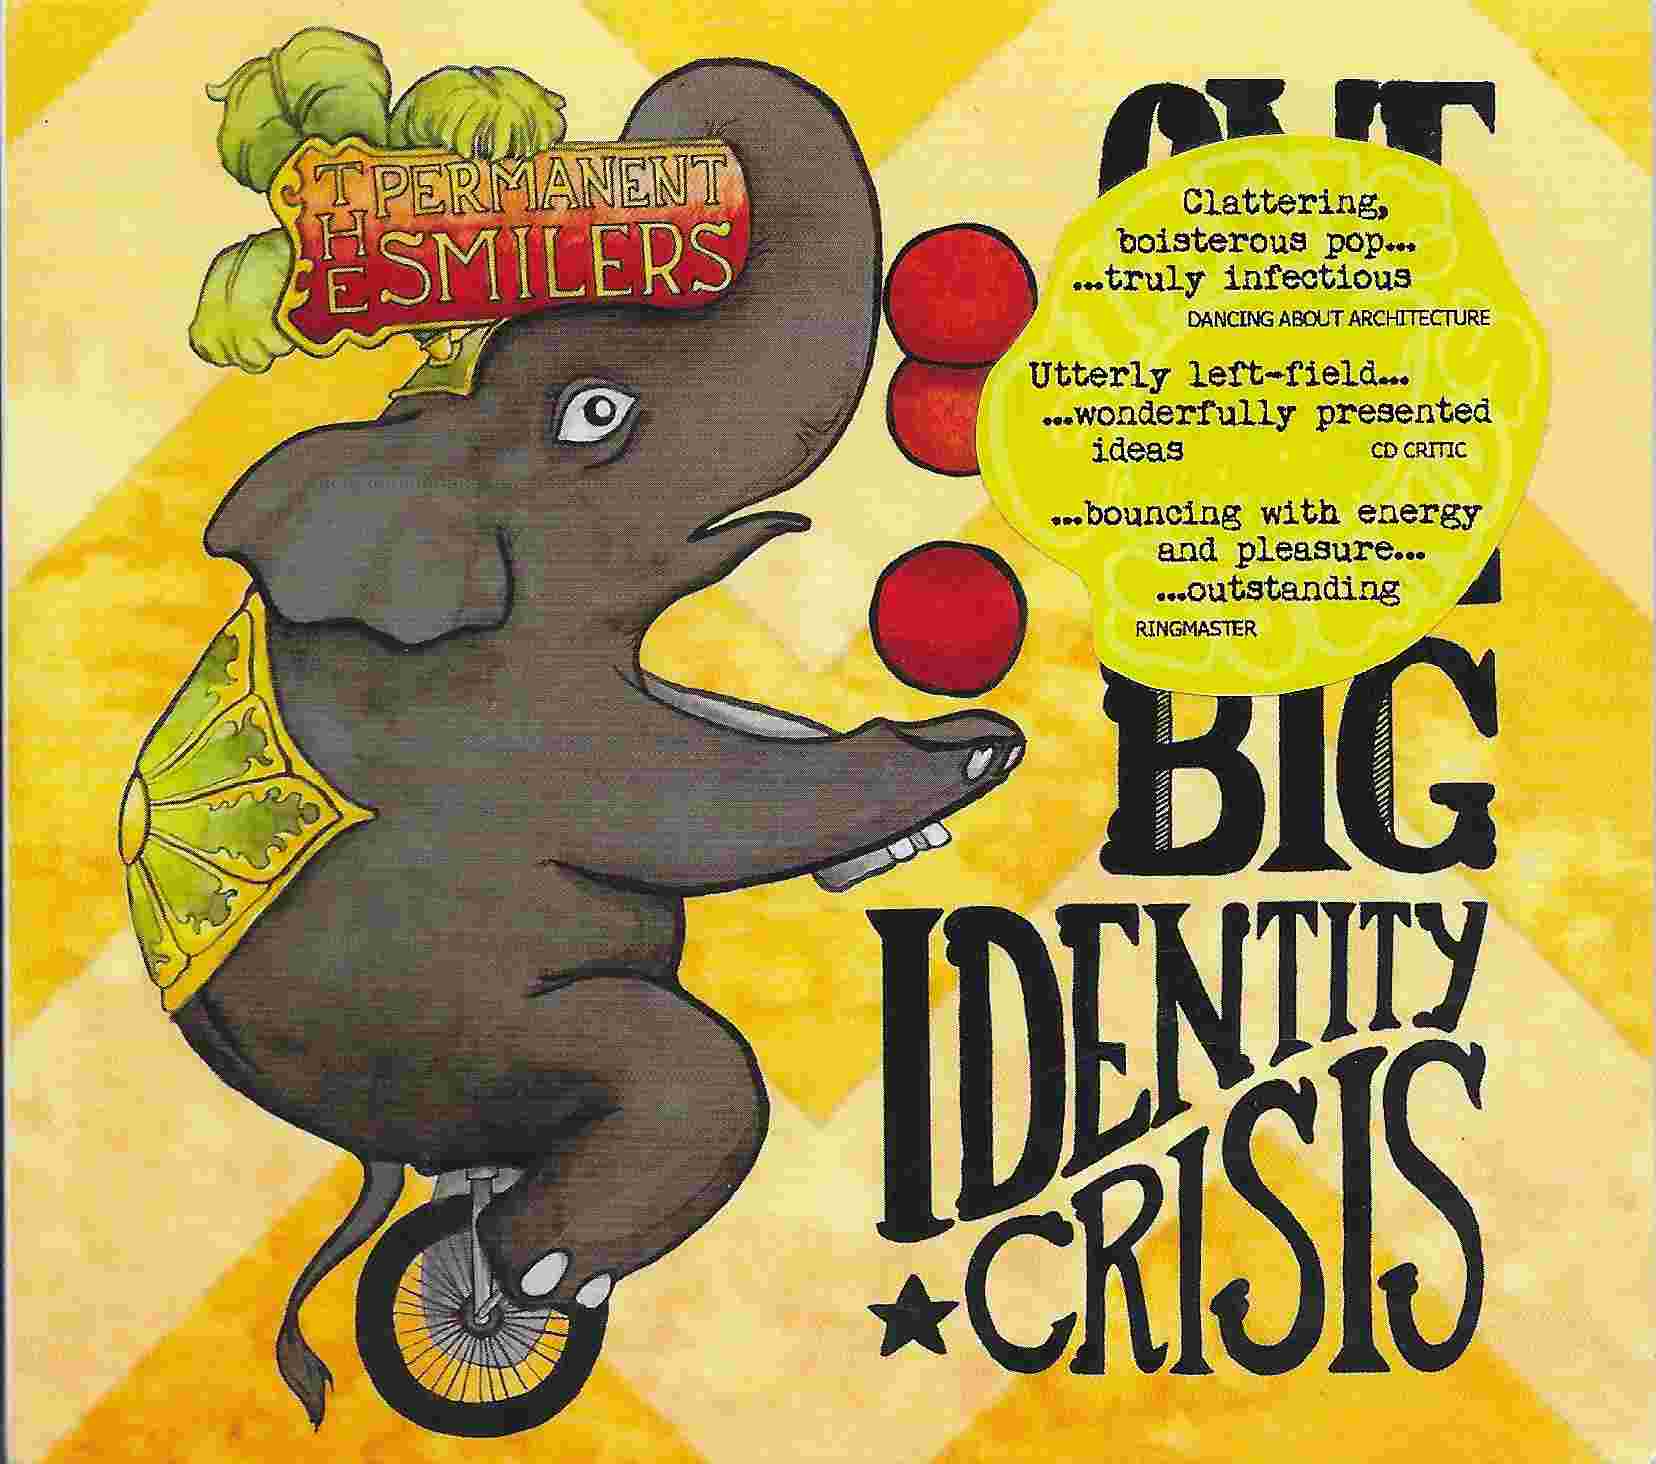 Picture of CITRIC 10 One real big identity crisis by artist The Permanent Smilers 